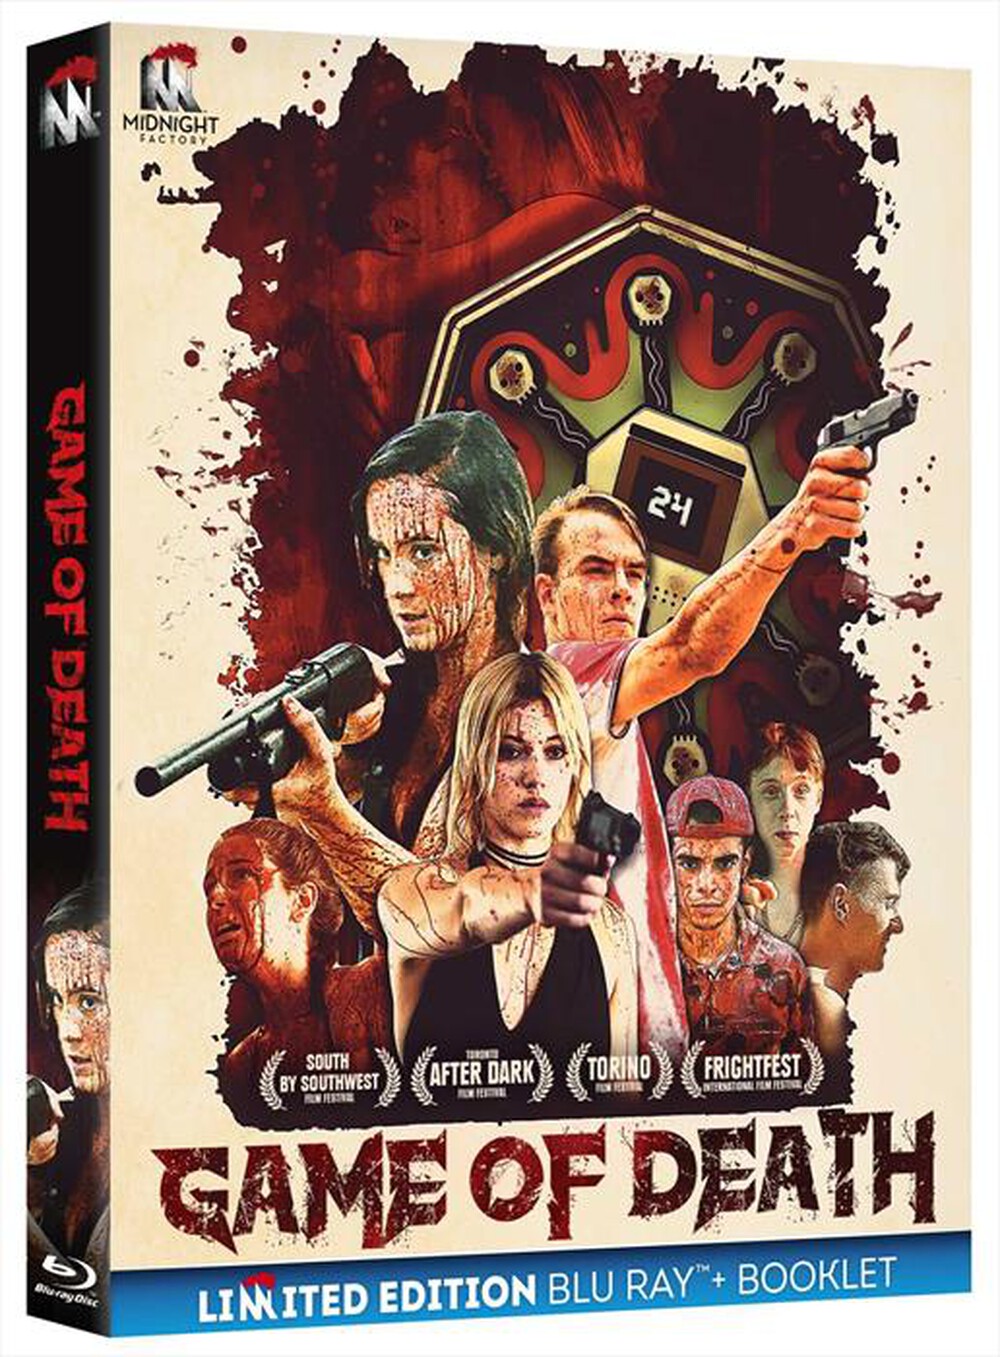 "Midnight Factory - Game Of Death (Blu-Ray+Booklet)"